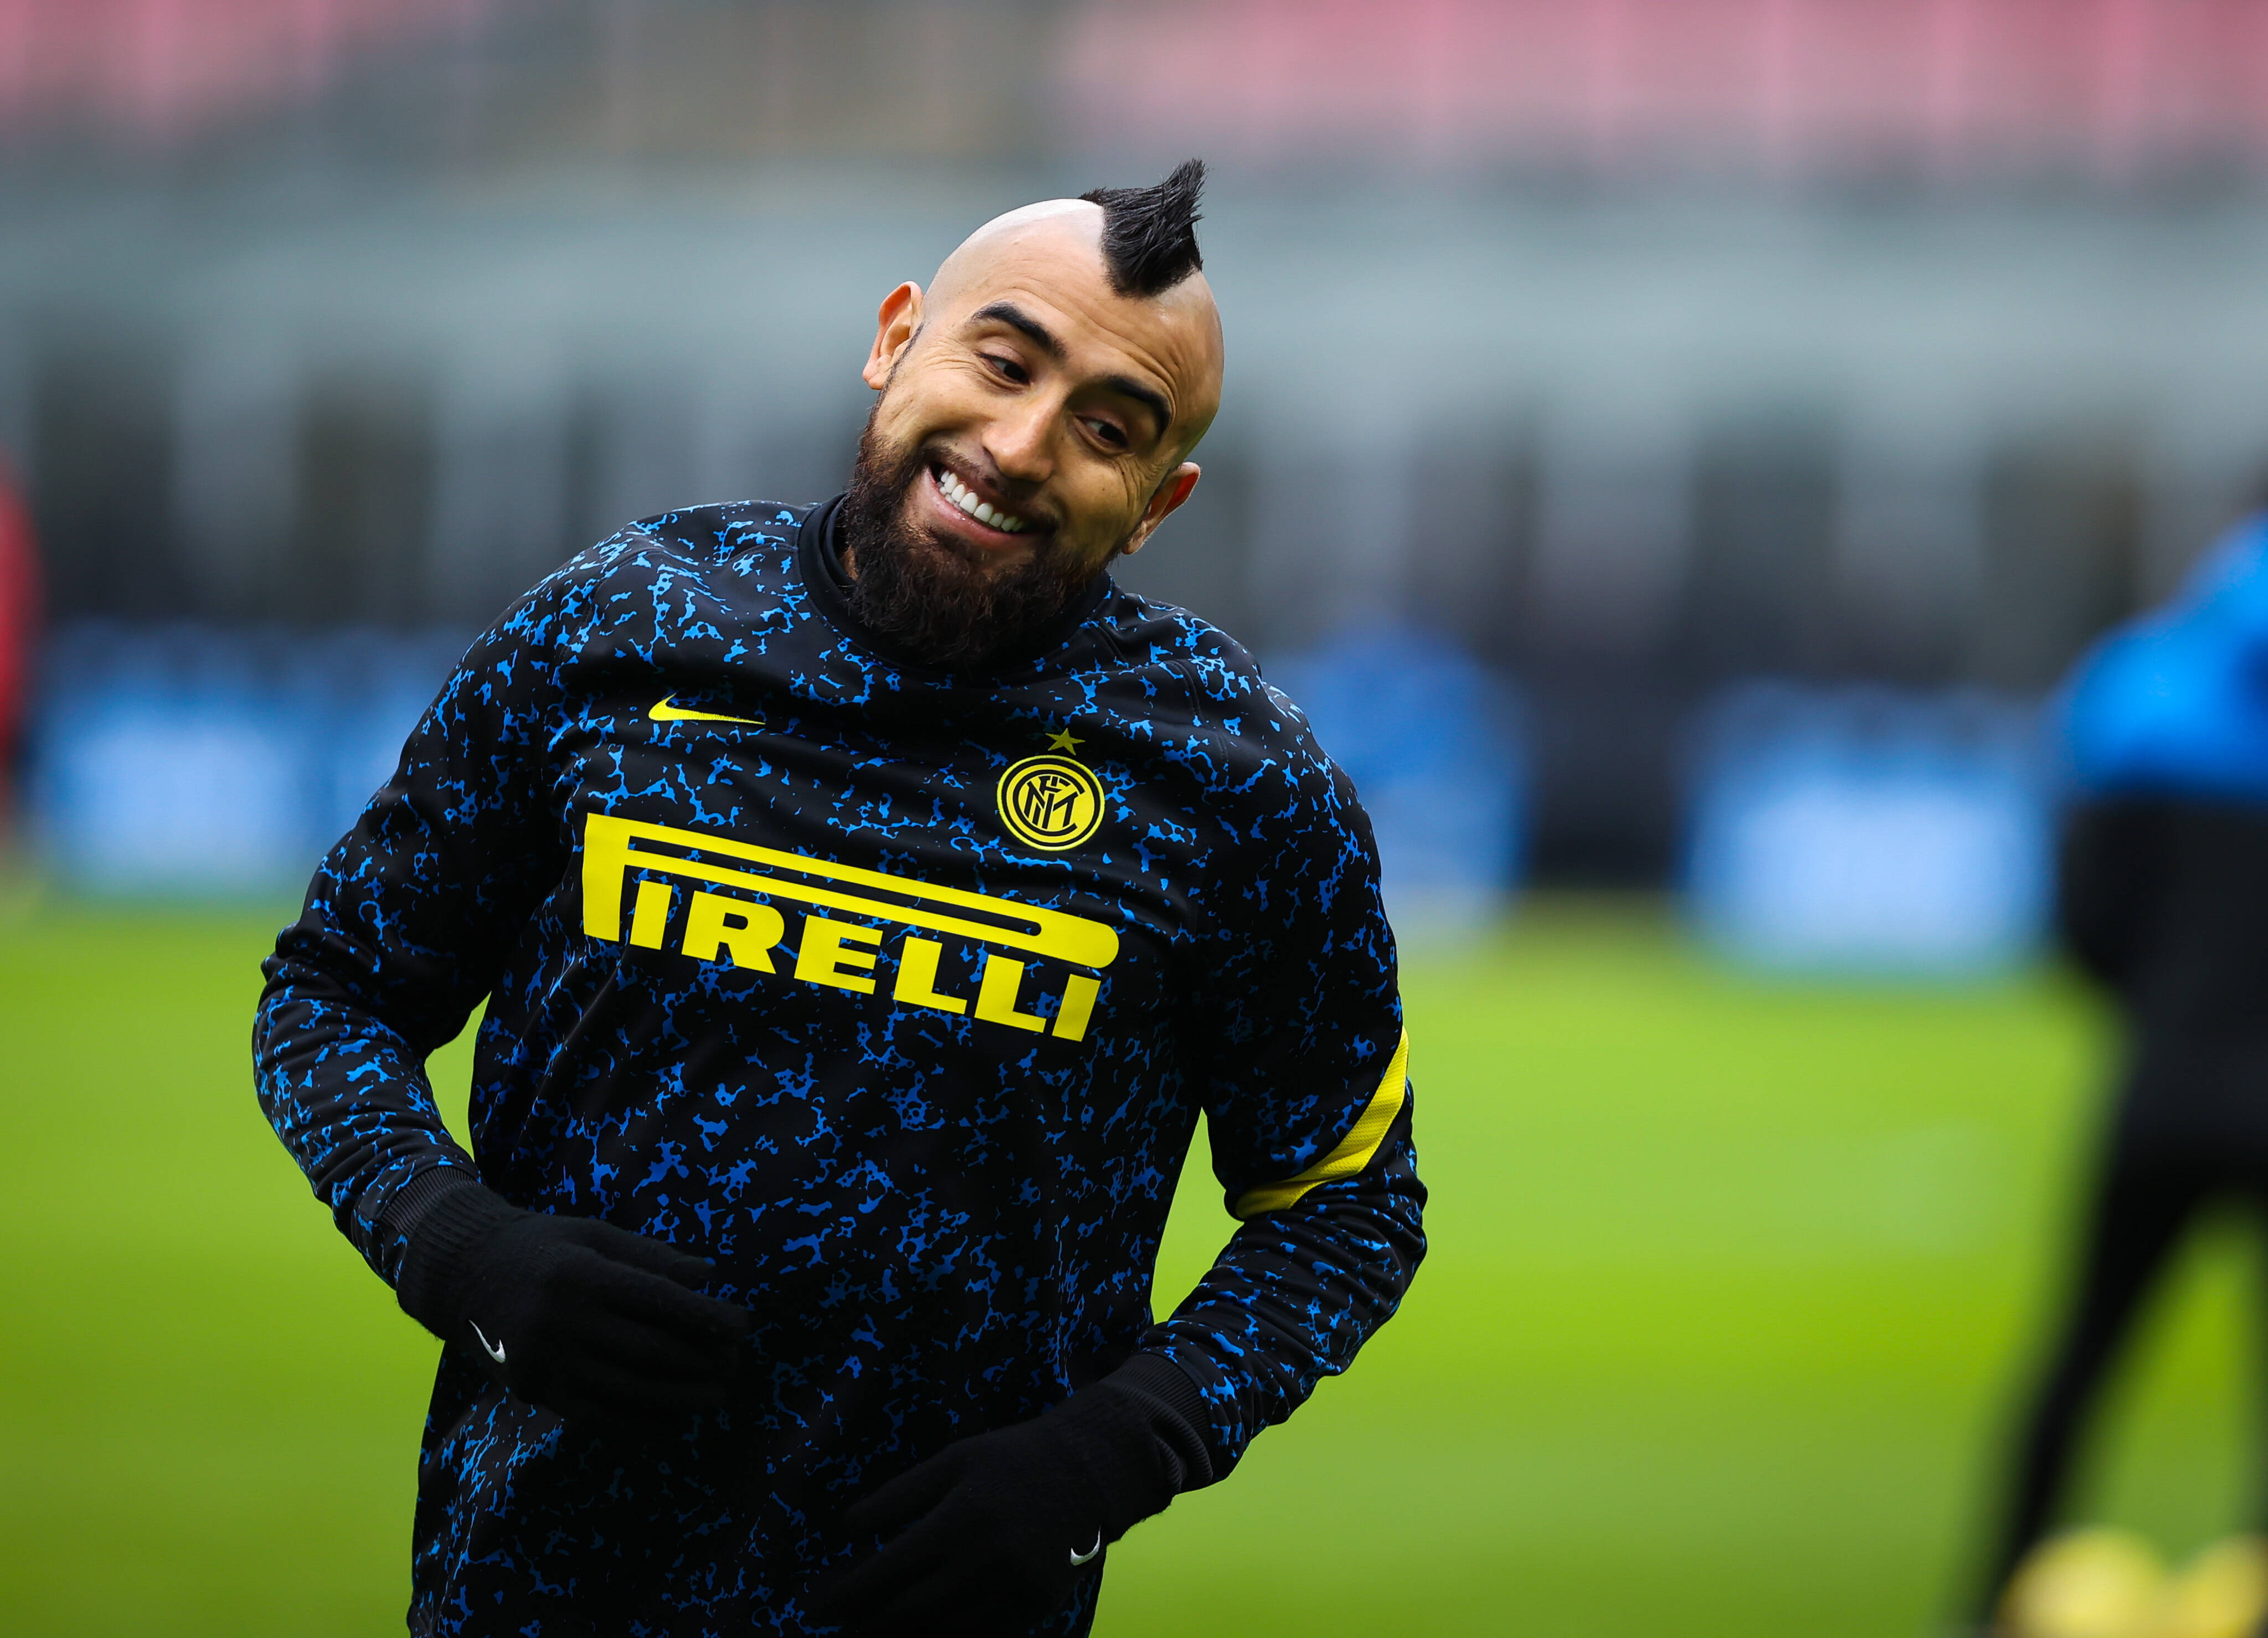 Arturo Vidal Of Fc Internazionale Warms Up During The Serie A 2020/21 Football Match Between Fc Internazionale Vs Fc Cro